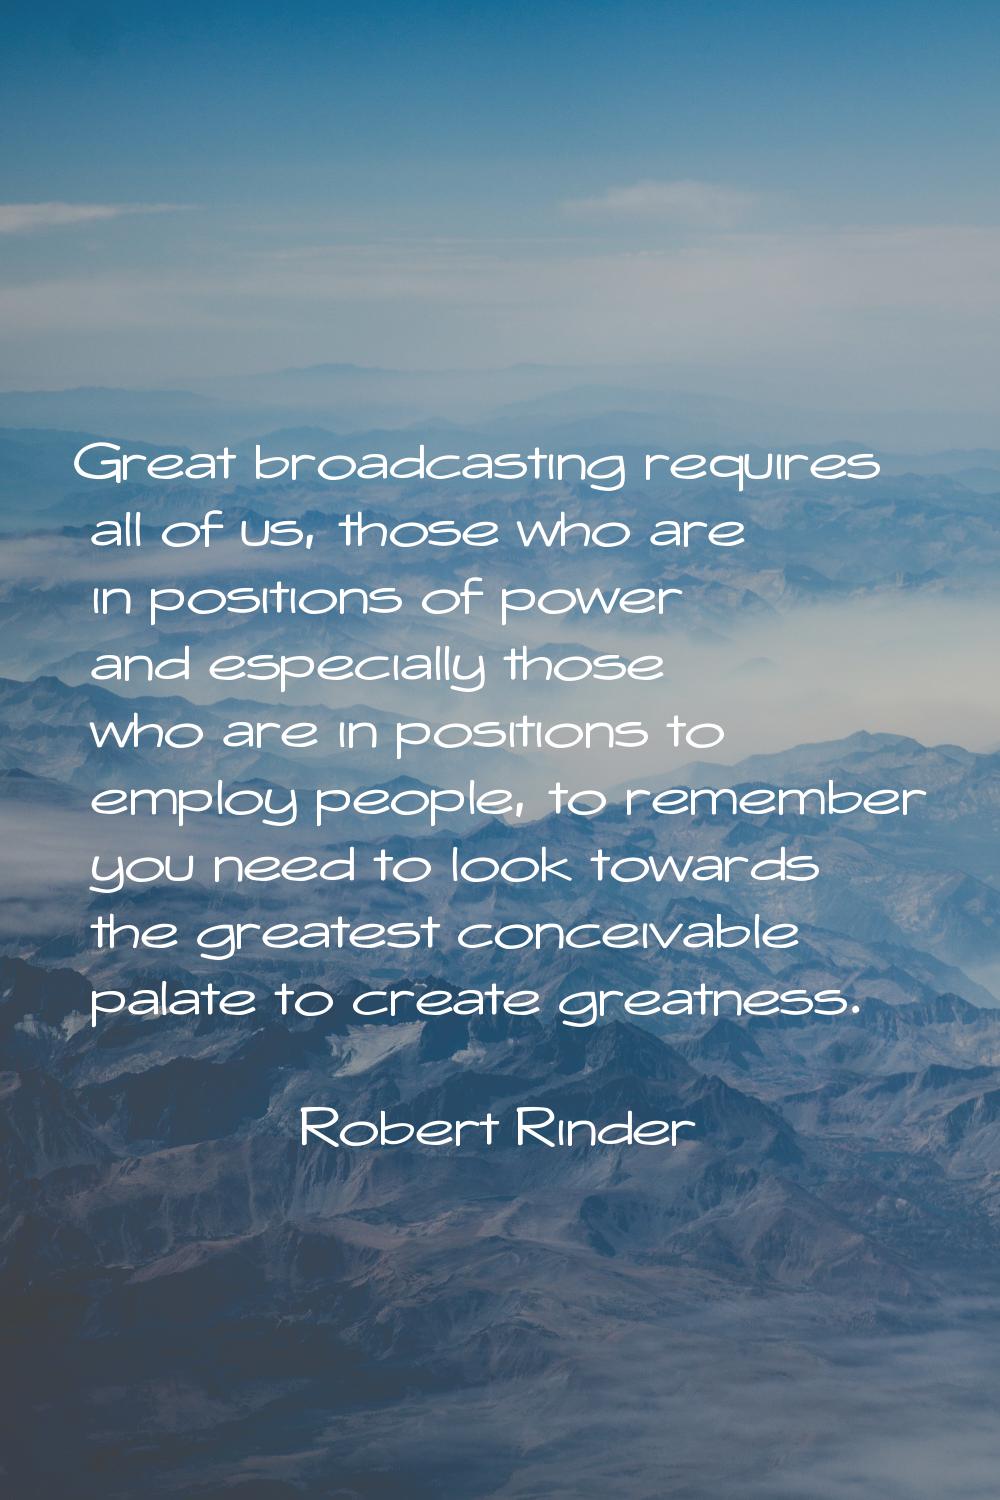 Great broadcasting requires all of us, those who are in positions of power and especially those who